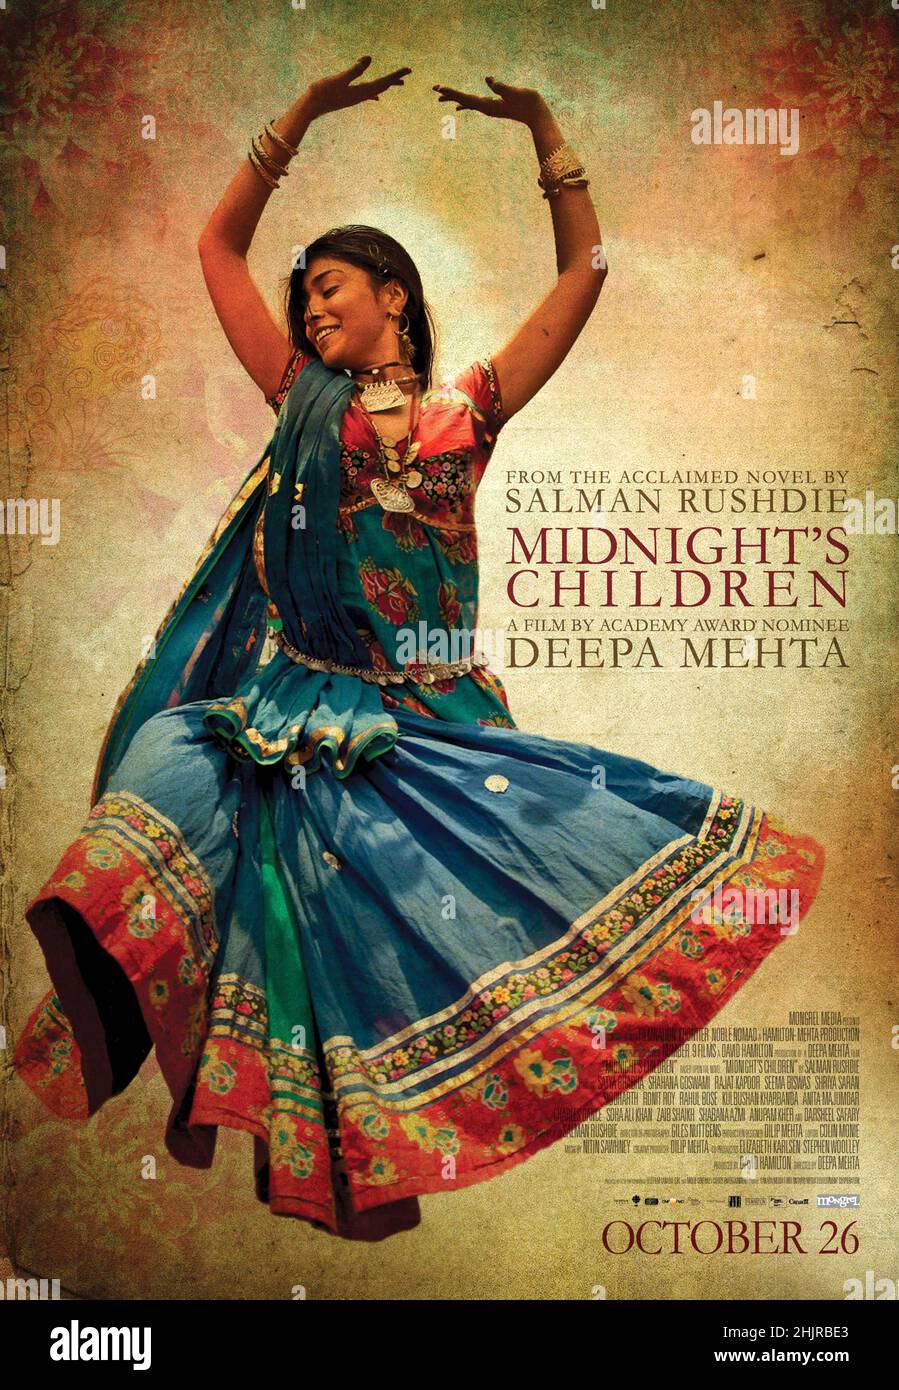 Midnight's Children (2012) directed by Deepa Mehta and starring  Rajat Kapoor, Vansh Bhardwaj and Anupam Kher. Big screen adaptation of Salman Rusahdie's novel about a pair of children, born within moments of India gaining independence from Britain, grow up in the country that is nothing like their parent's generation. Stock Photo